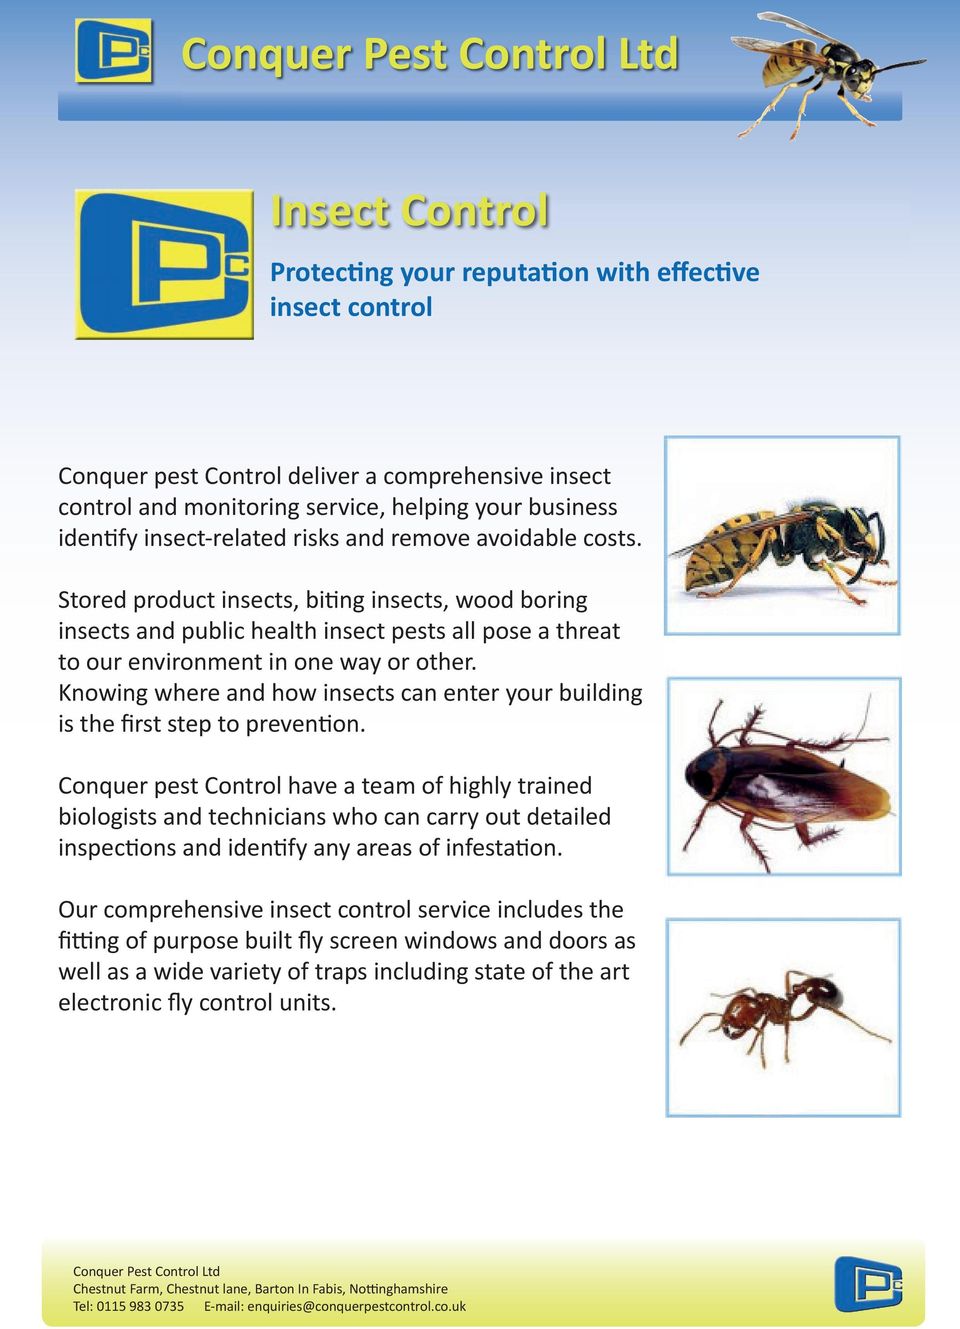 Knowing where and how insects can enter your building is the first step to prevention.